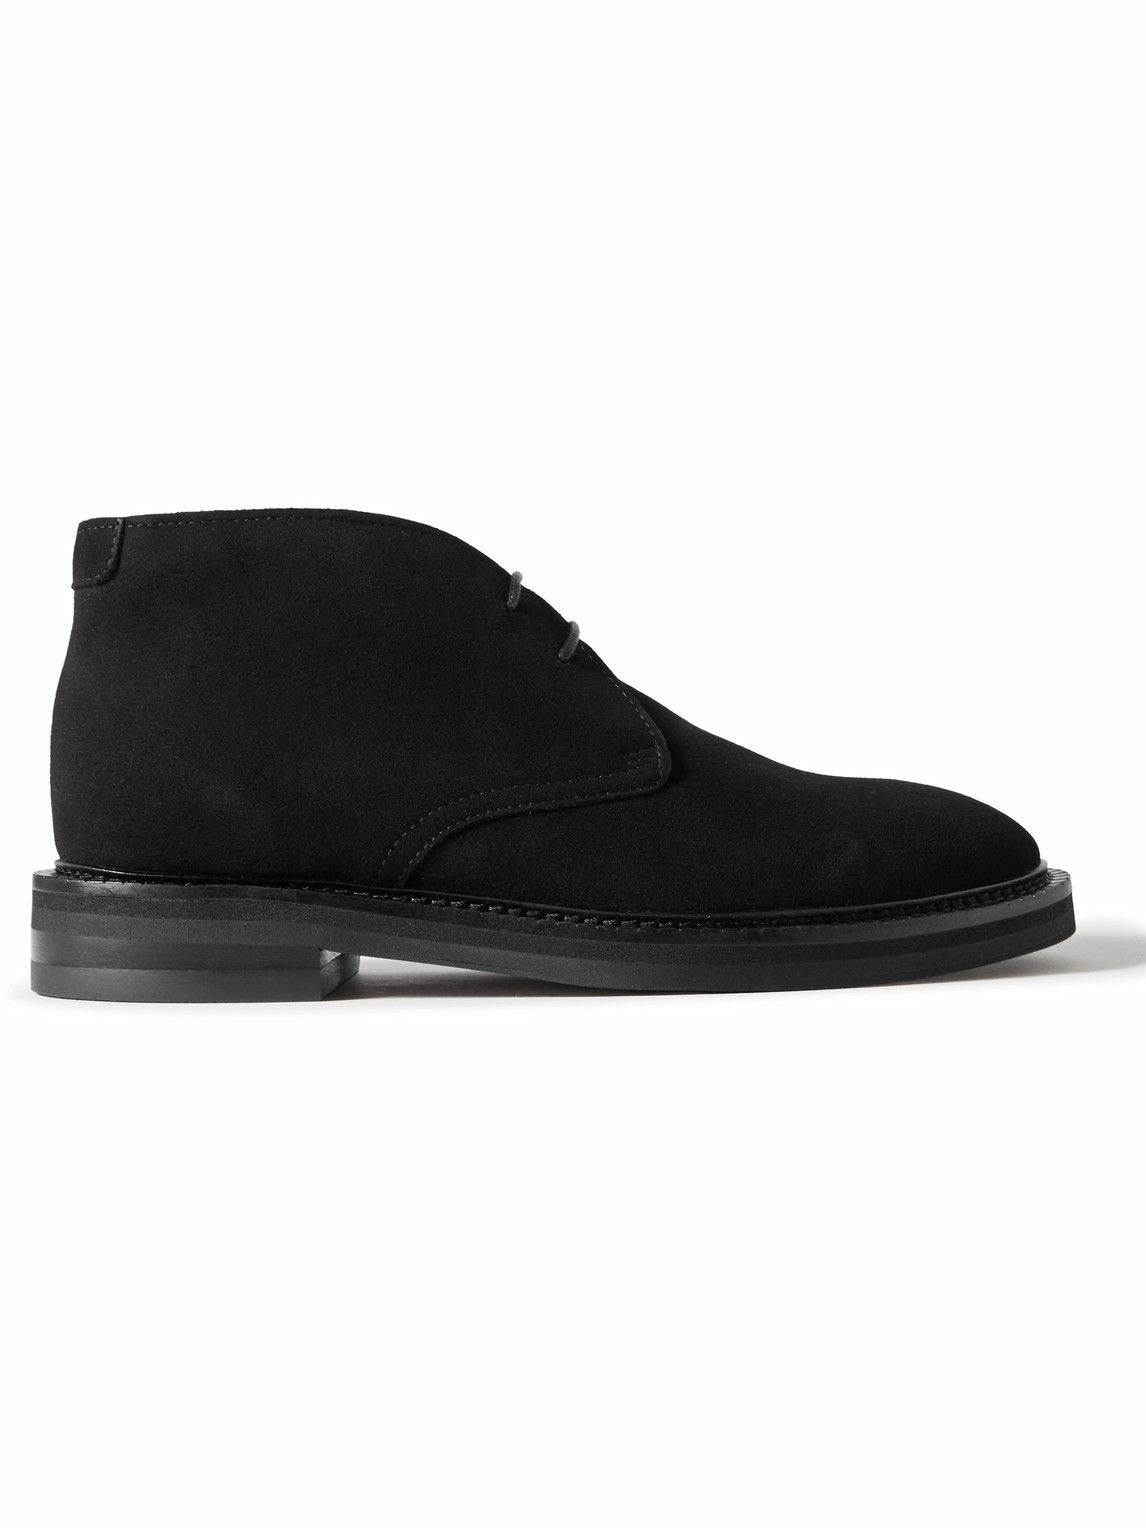 Photo: Mr P. - Lucien Regenerated Suede by evolo® Desert Boots - Black